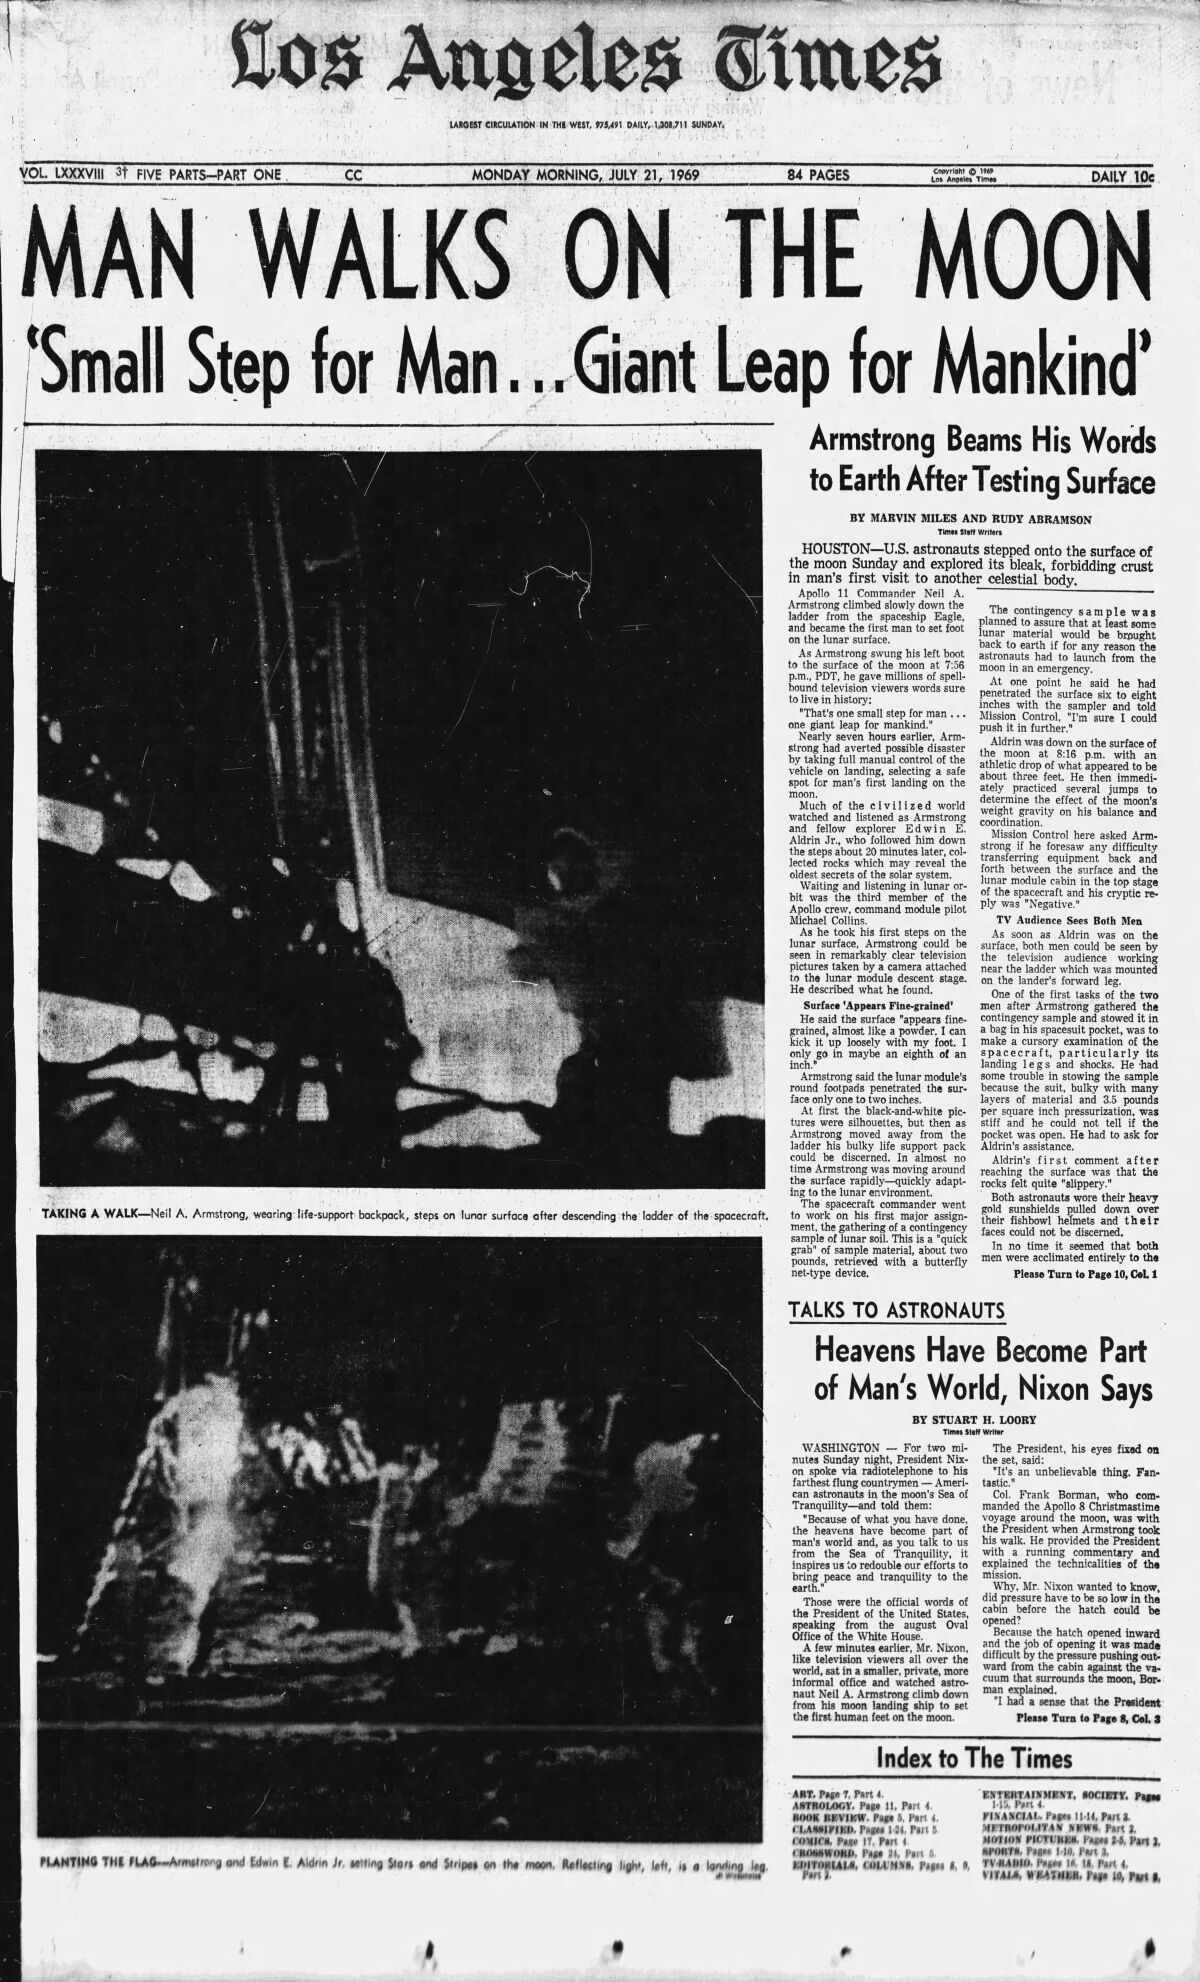 The front page of a 1969 edition of the Los Angeles Times reads: "Man walks on the moon,' with large black-and-white photos.